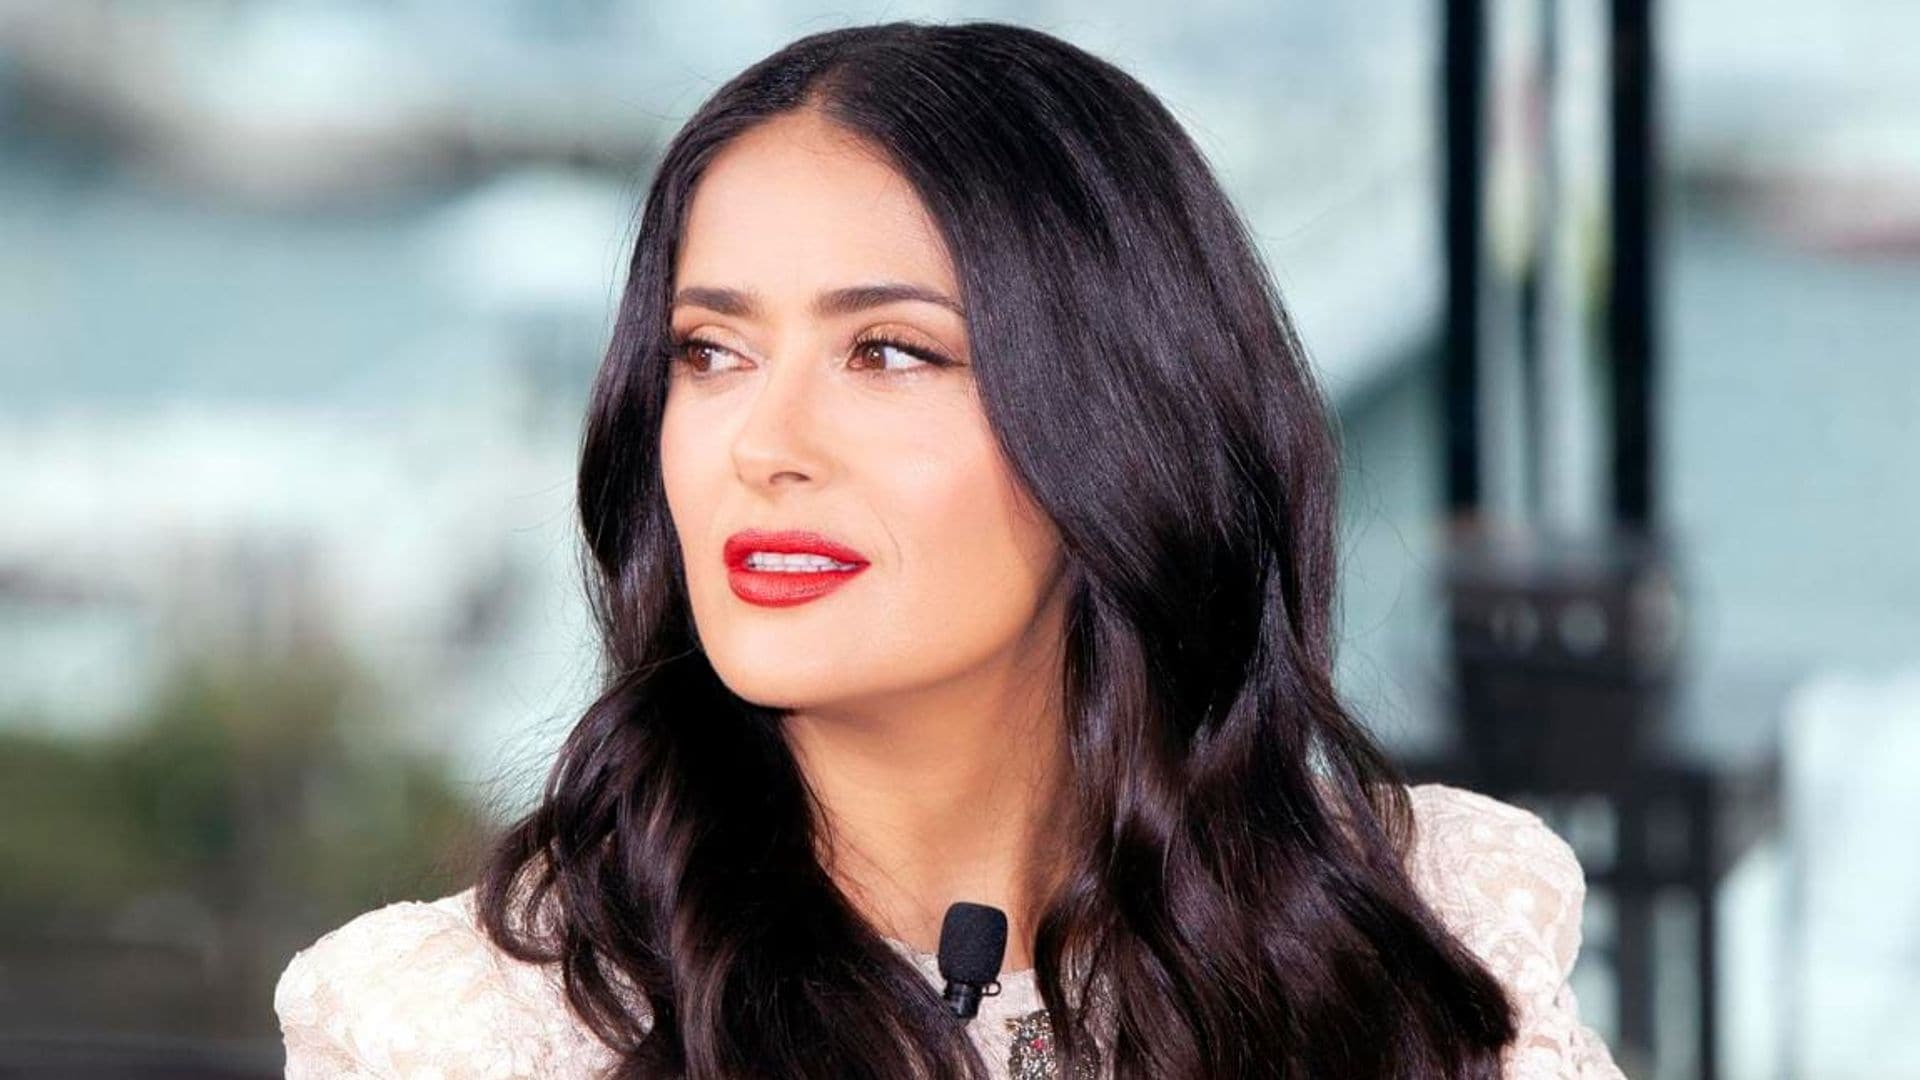 Salma Hayek’s topless pregnancy throwback marks special occasion